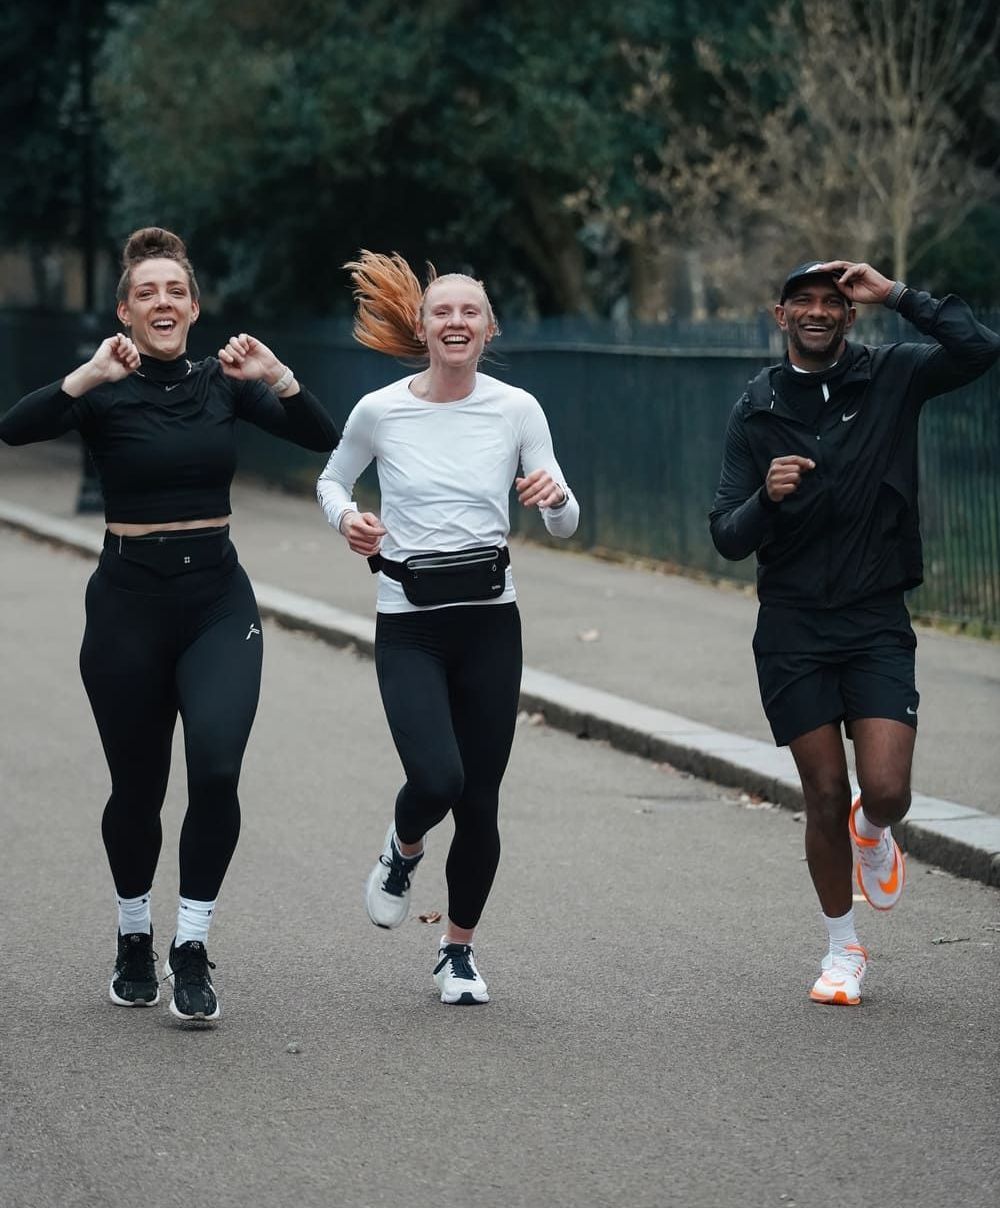 Anil Toraty running together with two women, all smiling